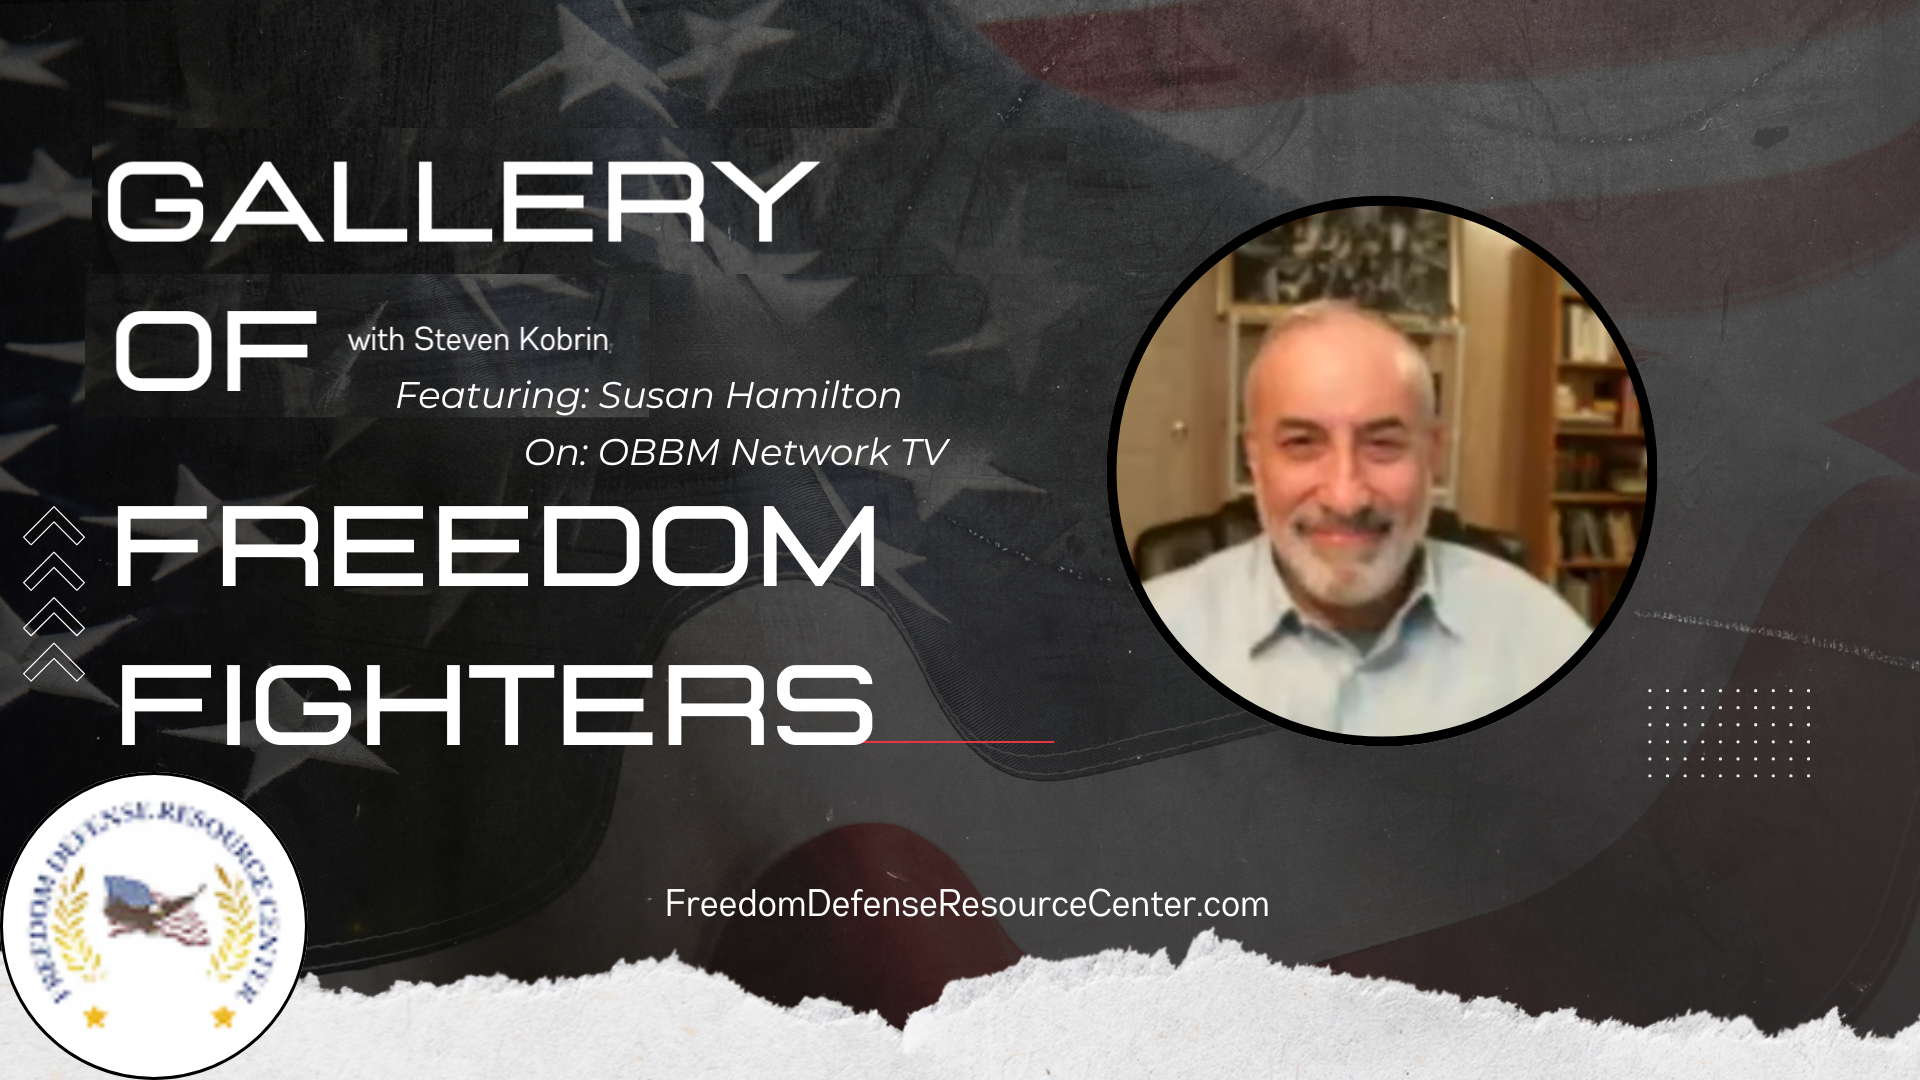 GFF70-OBBM Network TV - Susan Hamilton Pt2- Gallery of Freedom Fighters